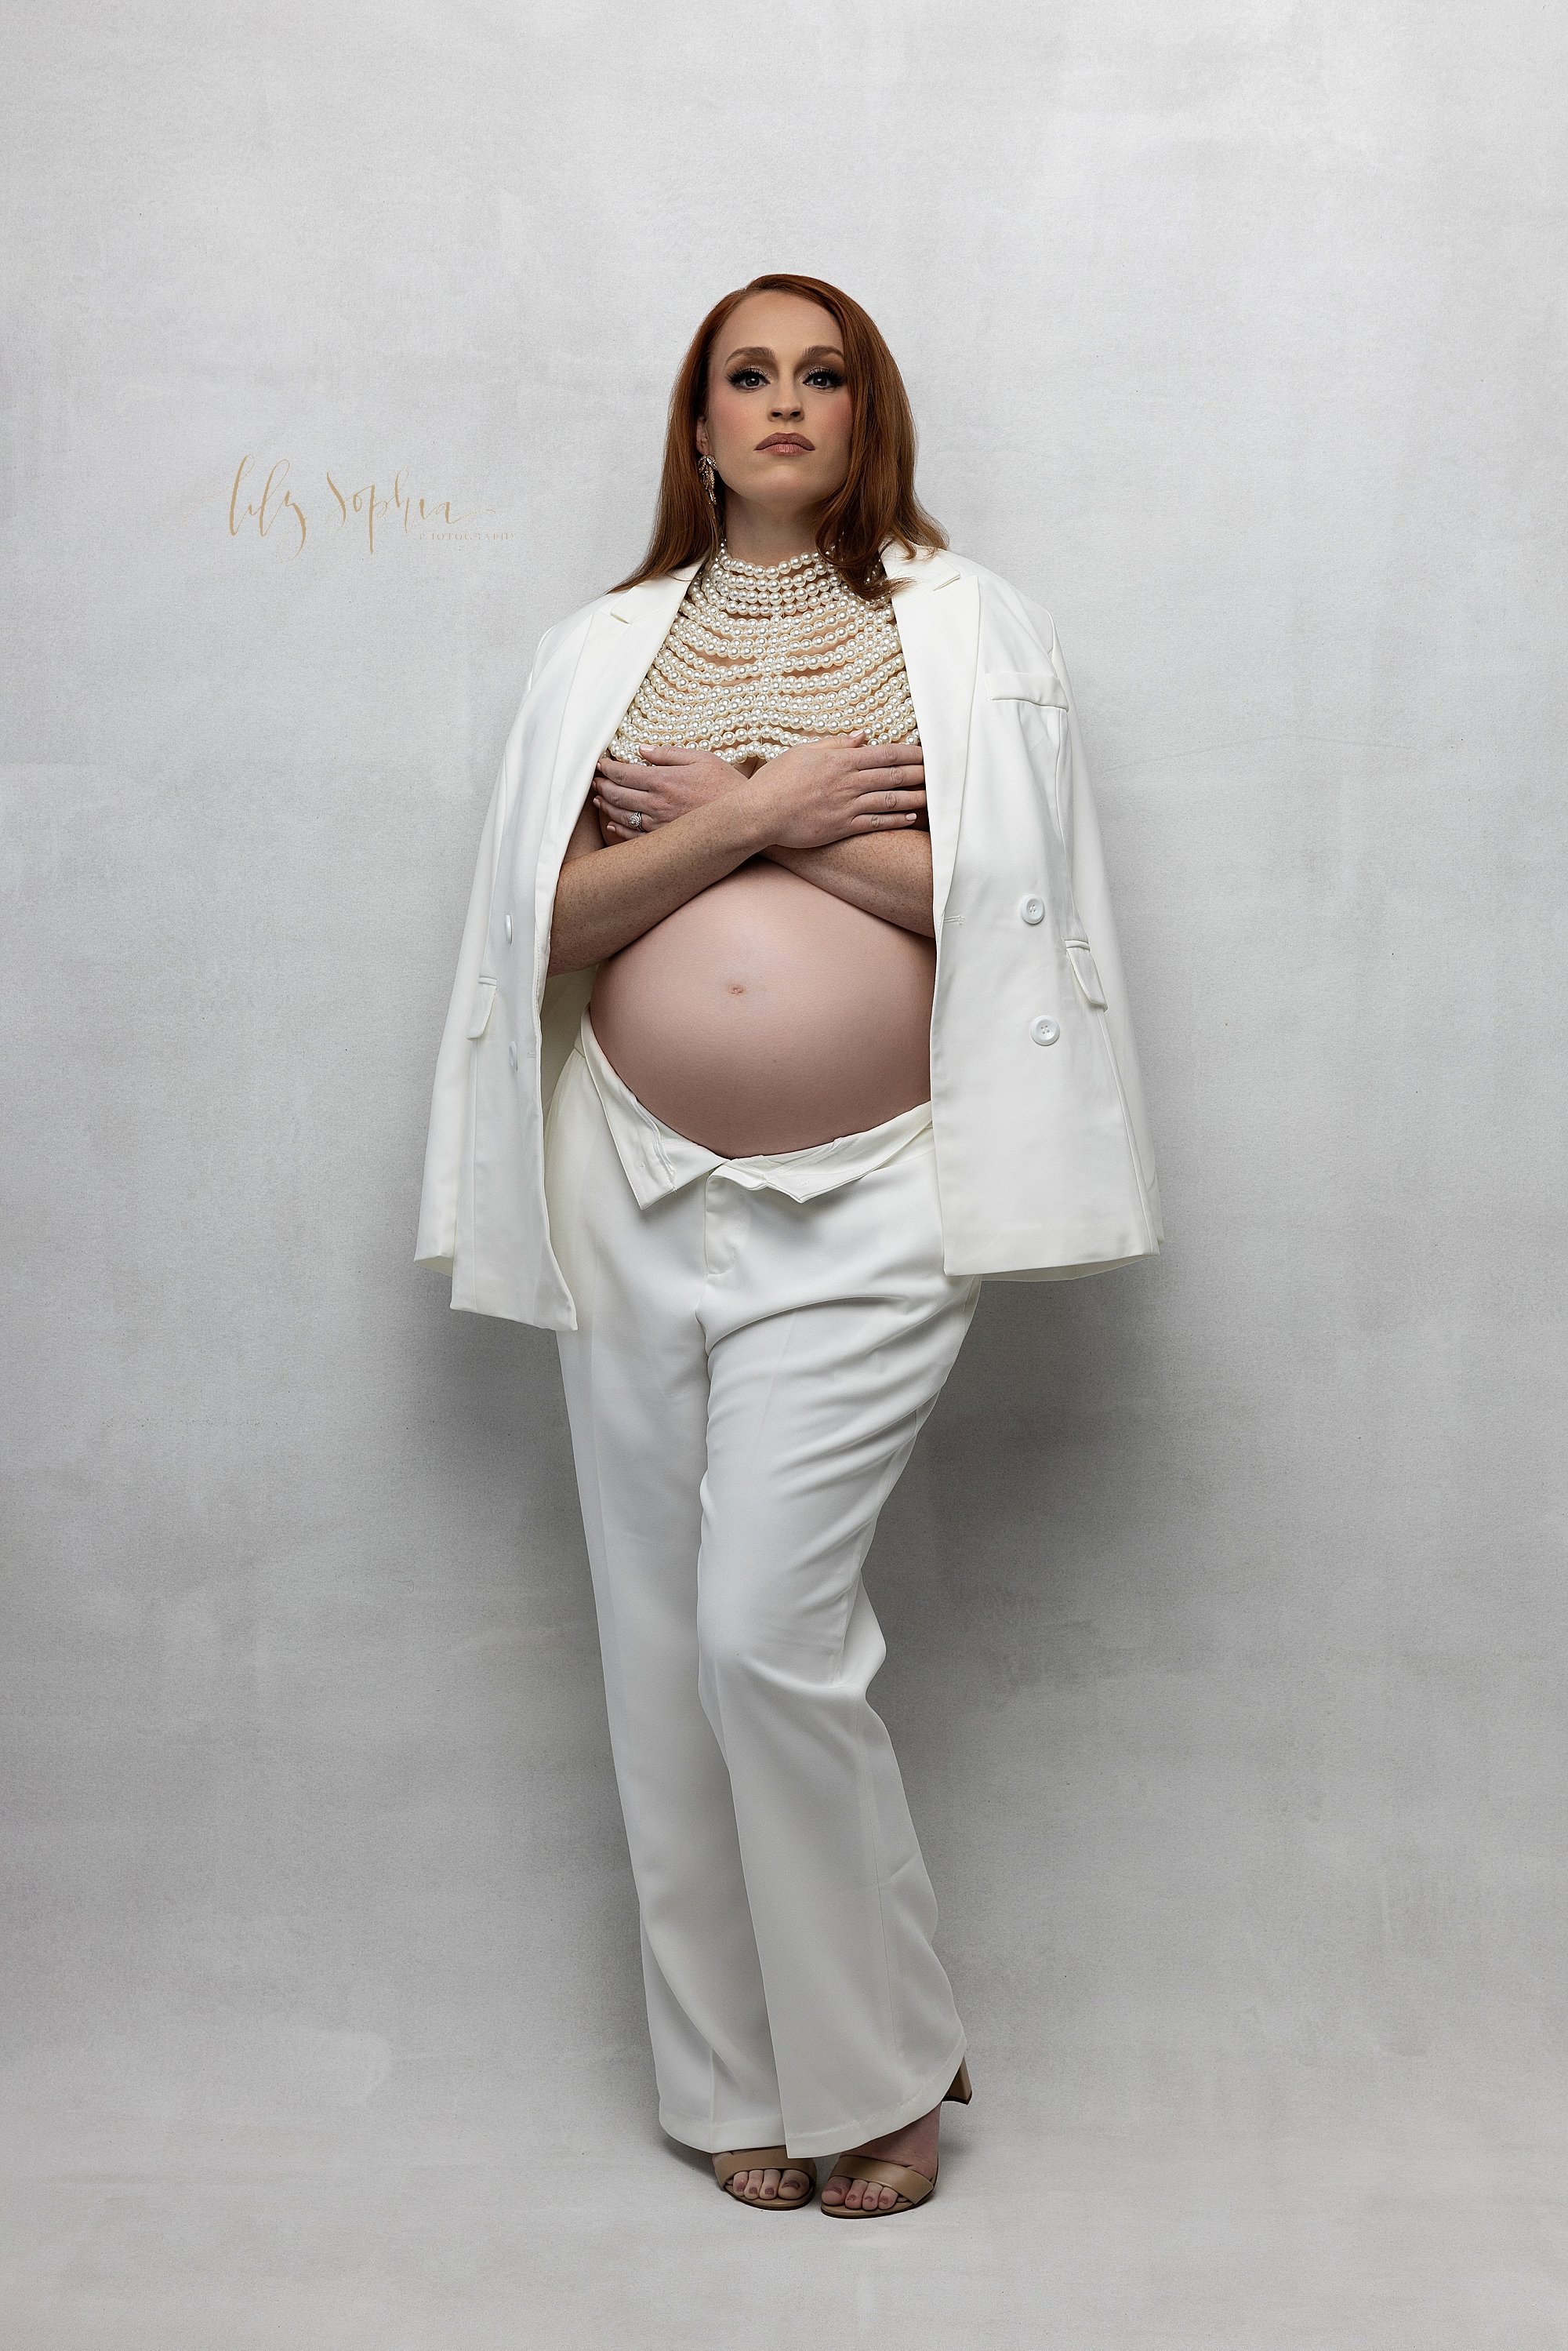  Modern maternity photo session with a pregnant woman wearing unbuttoned white pants a pearl collar and a suit jacket draped over her shoulders as she places her hands over her bare breasts and bares her belly in a photography studio near Kirkwood in